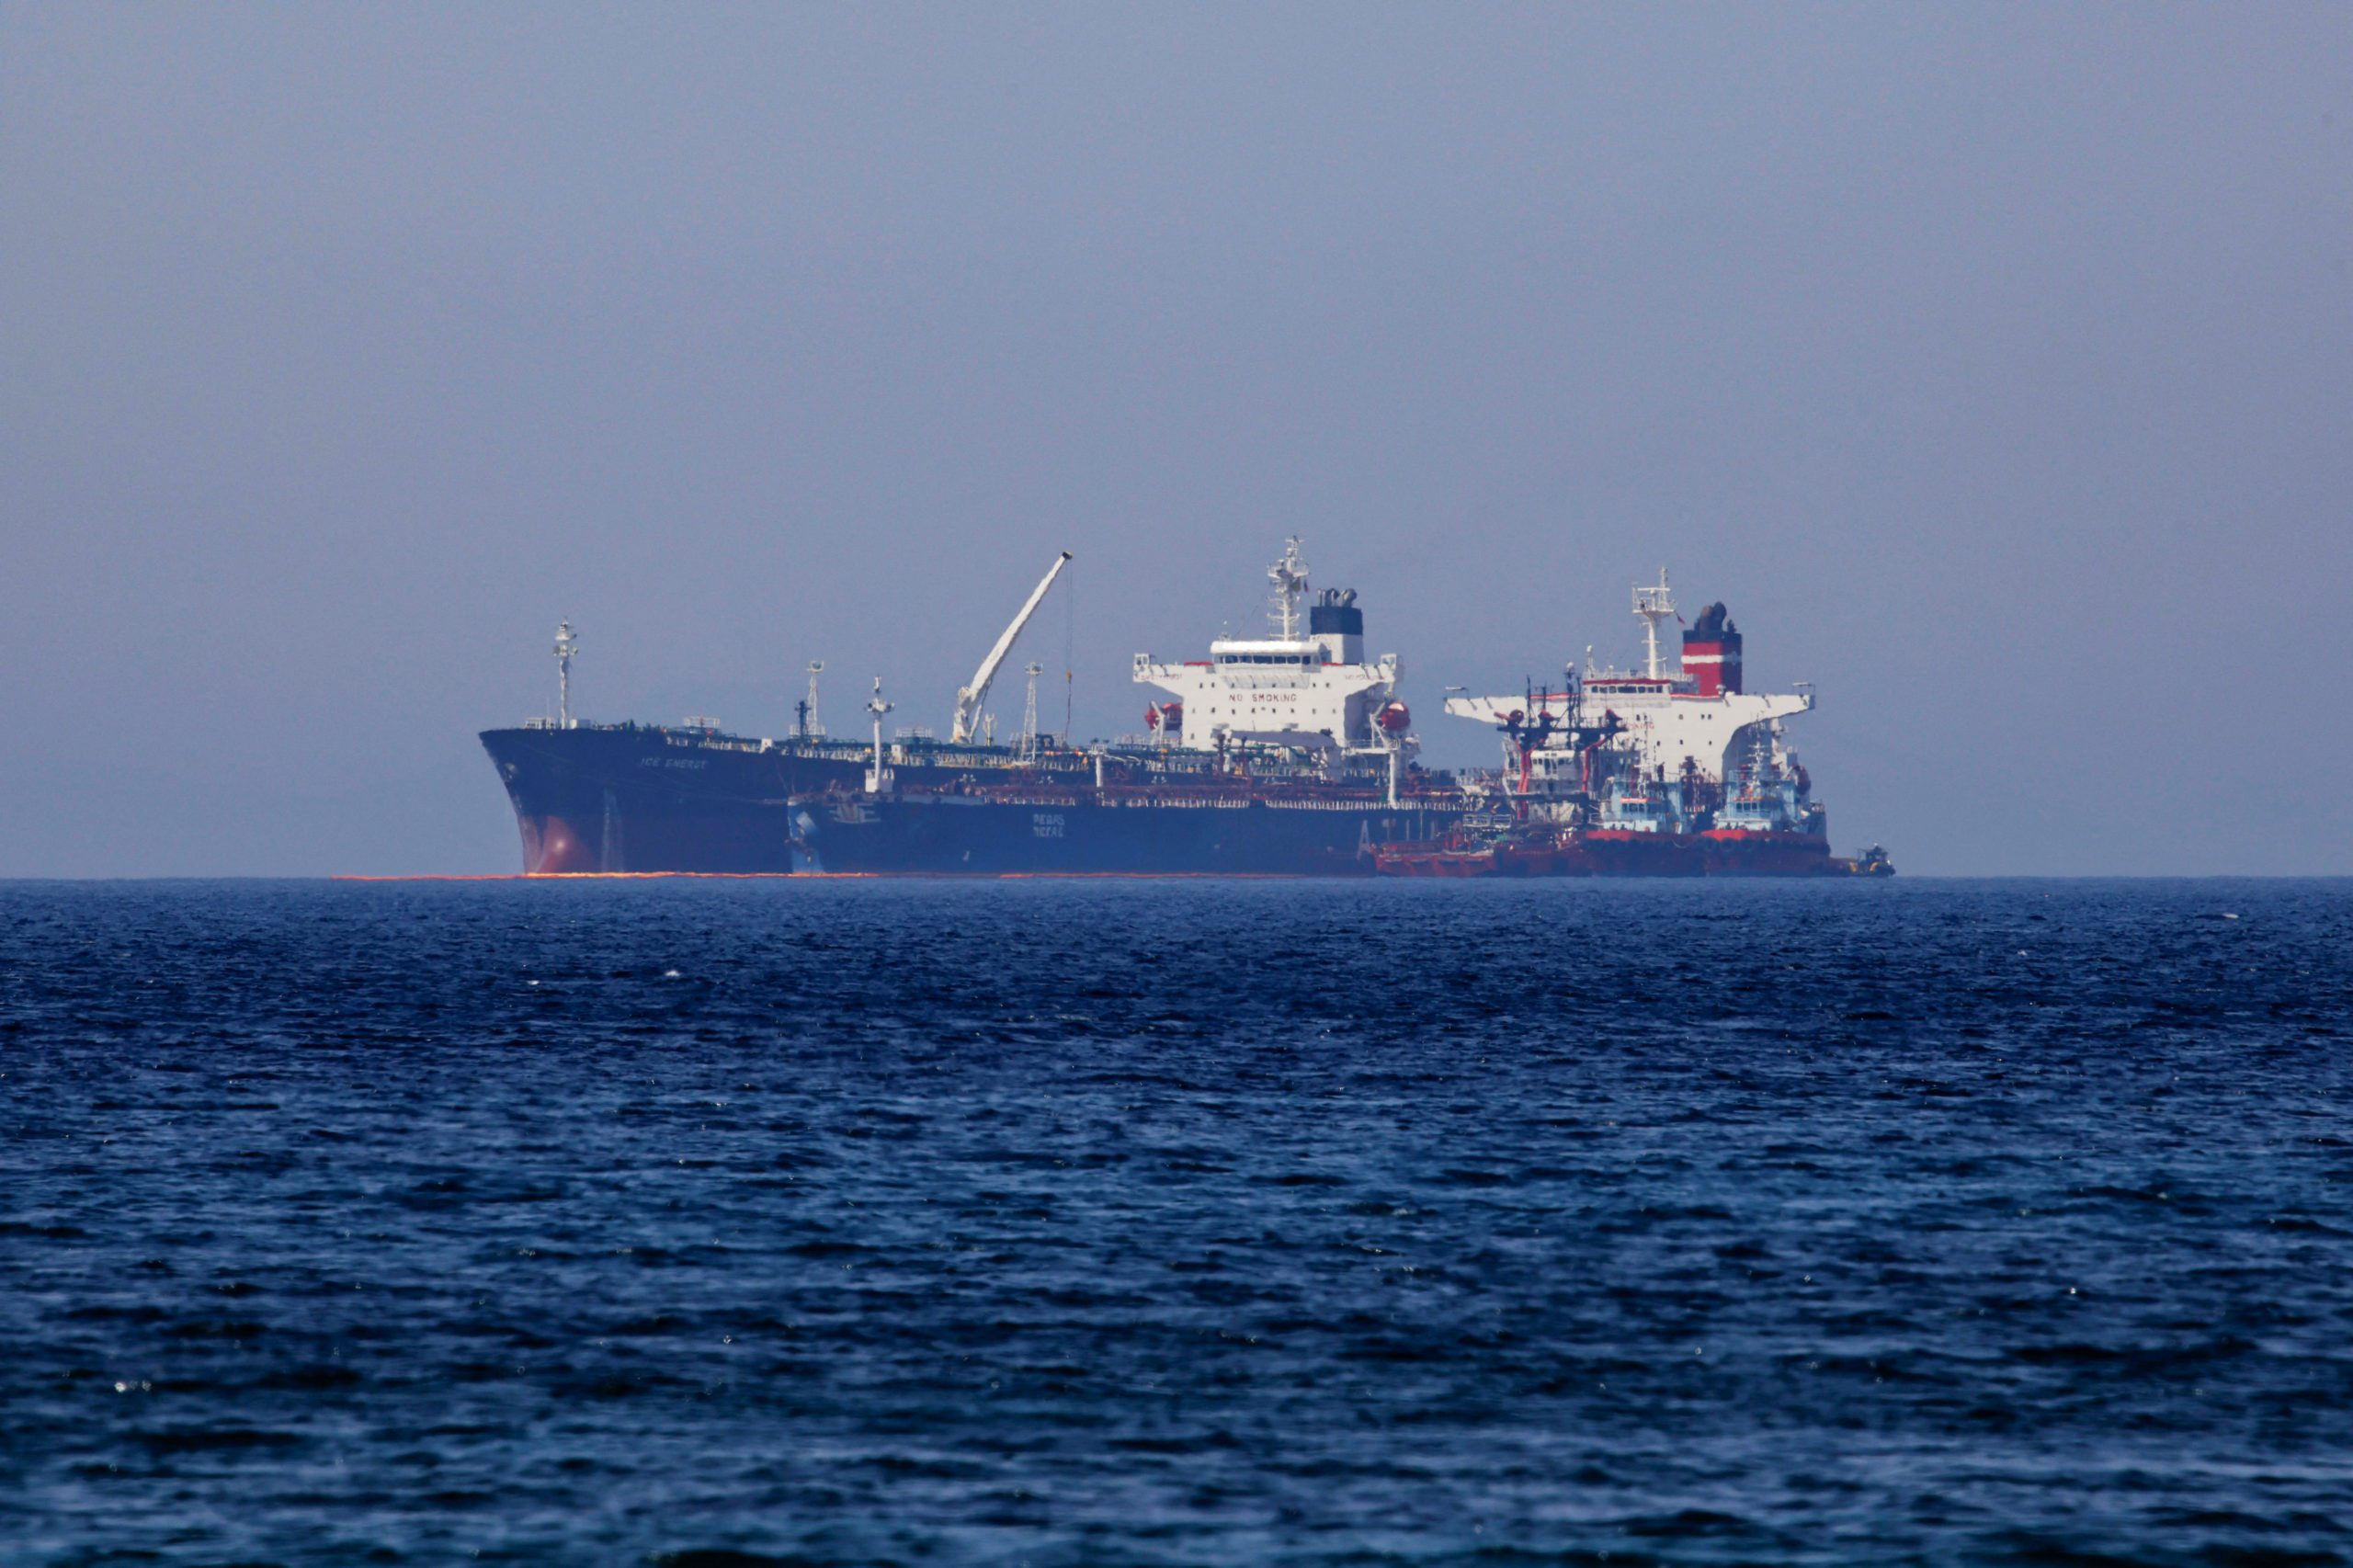 Iran’s Seizure of Oil Tankers Responds to ‘Robbery,’ Leader Says